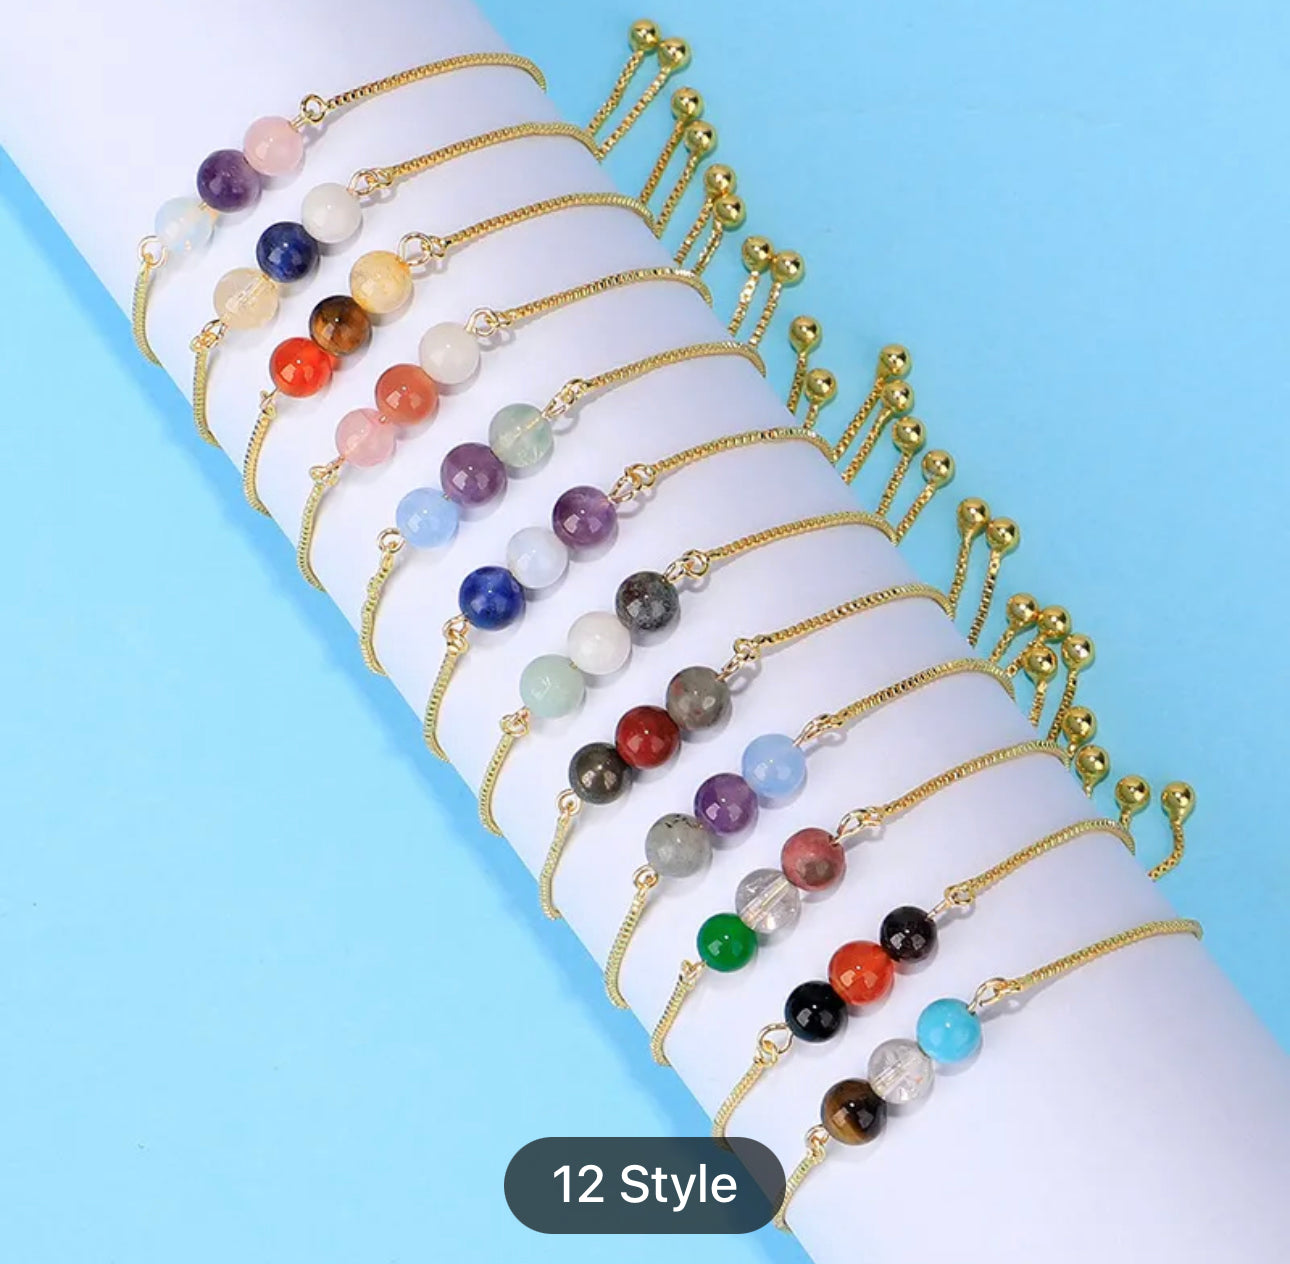 1pc Trendy Minimalist Beaded Chain Bracelet For Men For Daily Decoration, Gift For Family And Friends, Holiday Birthday Gift For Boyfriends / Girlfriends